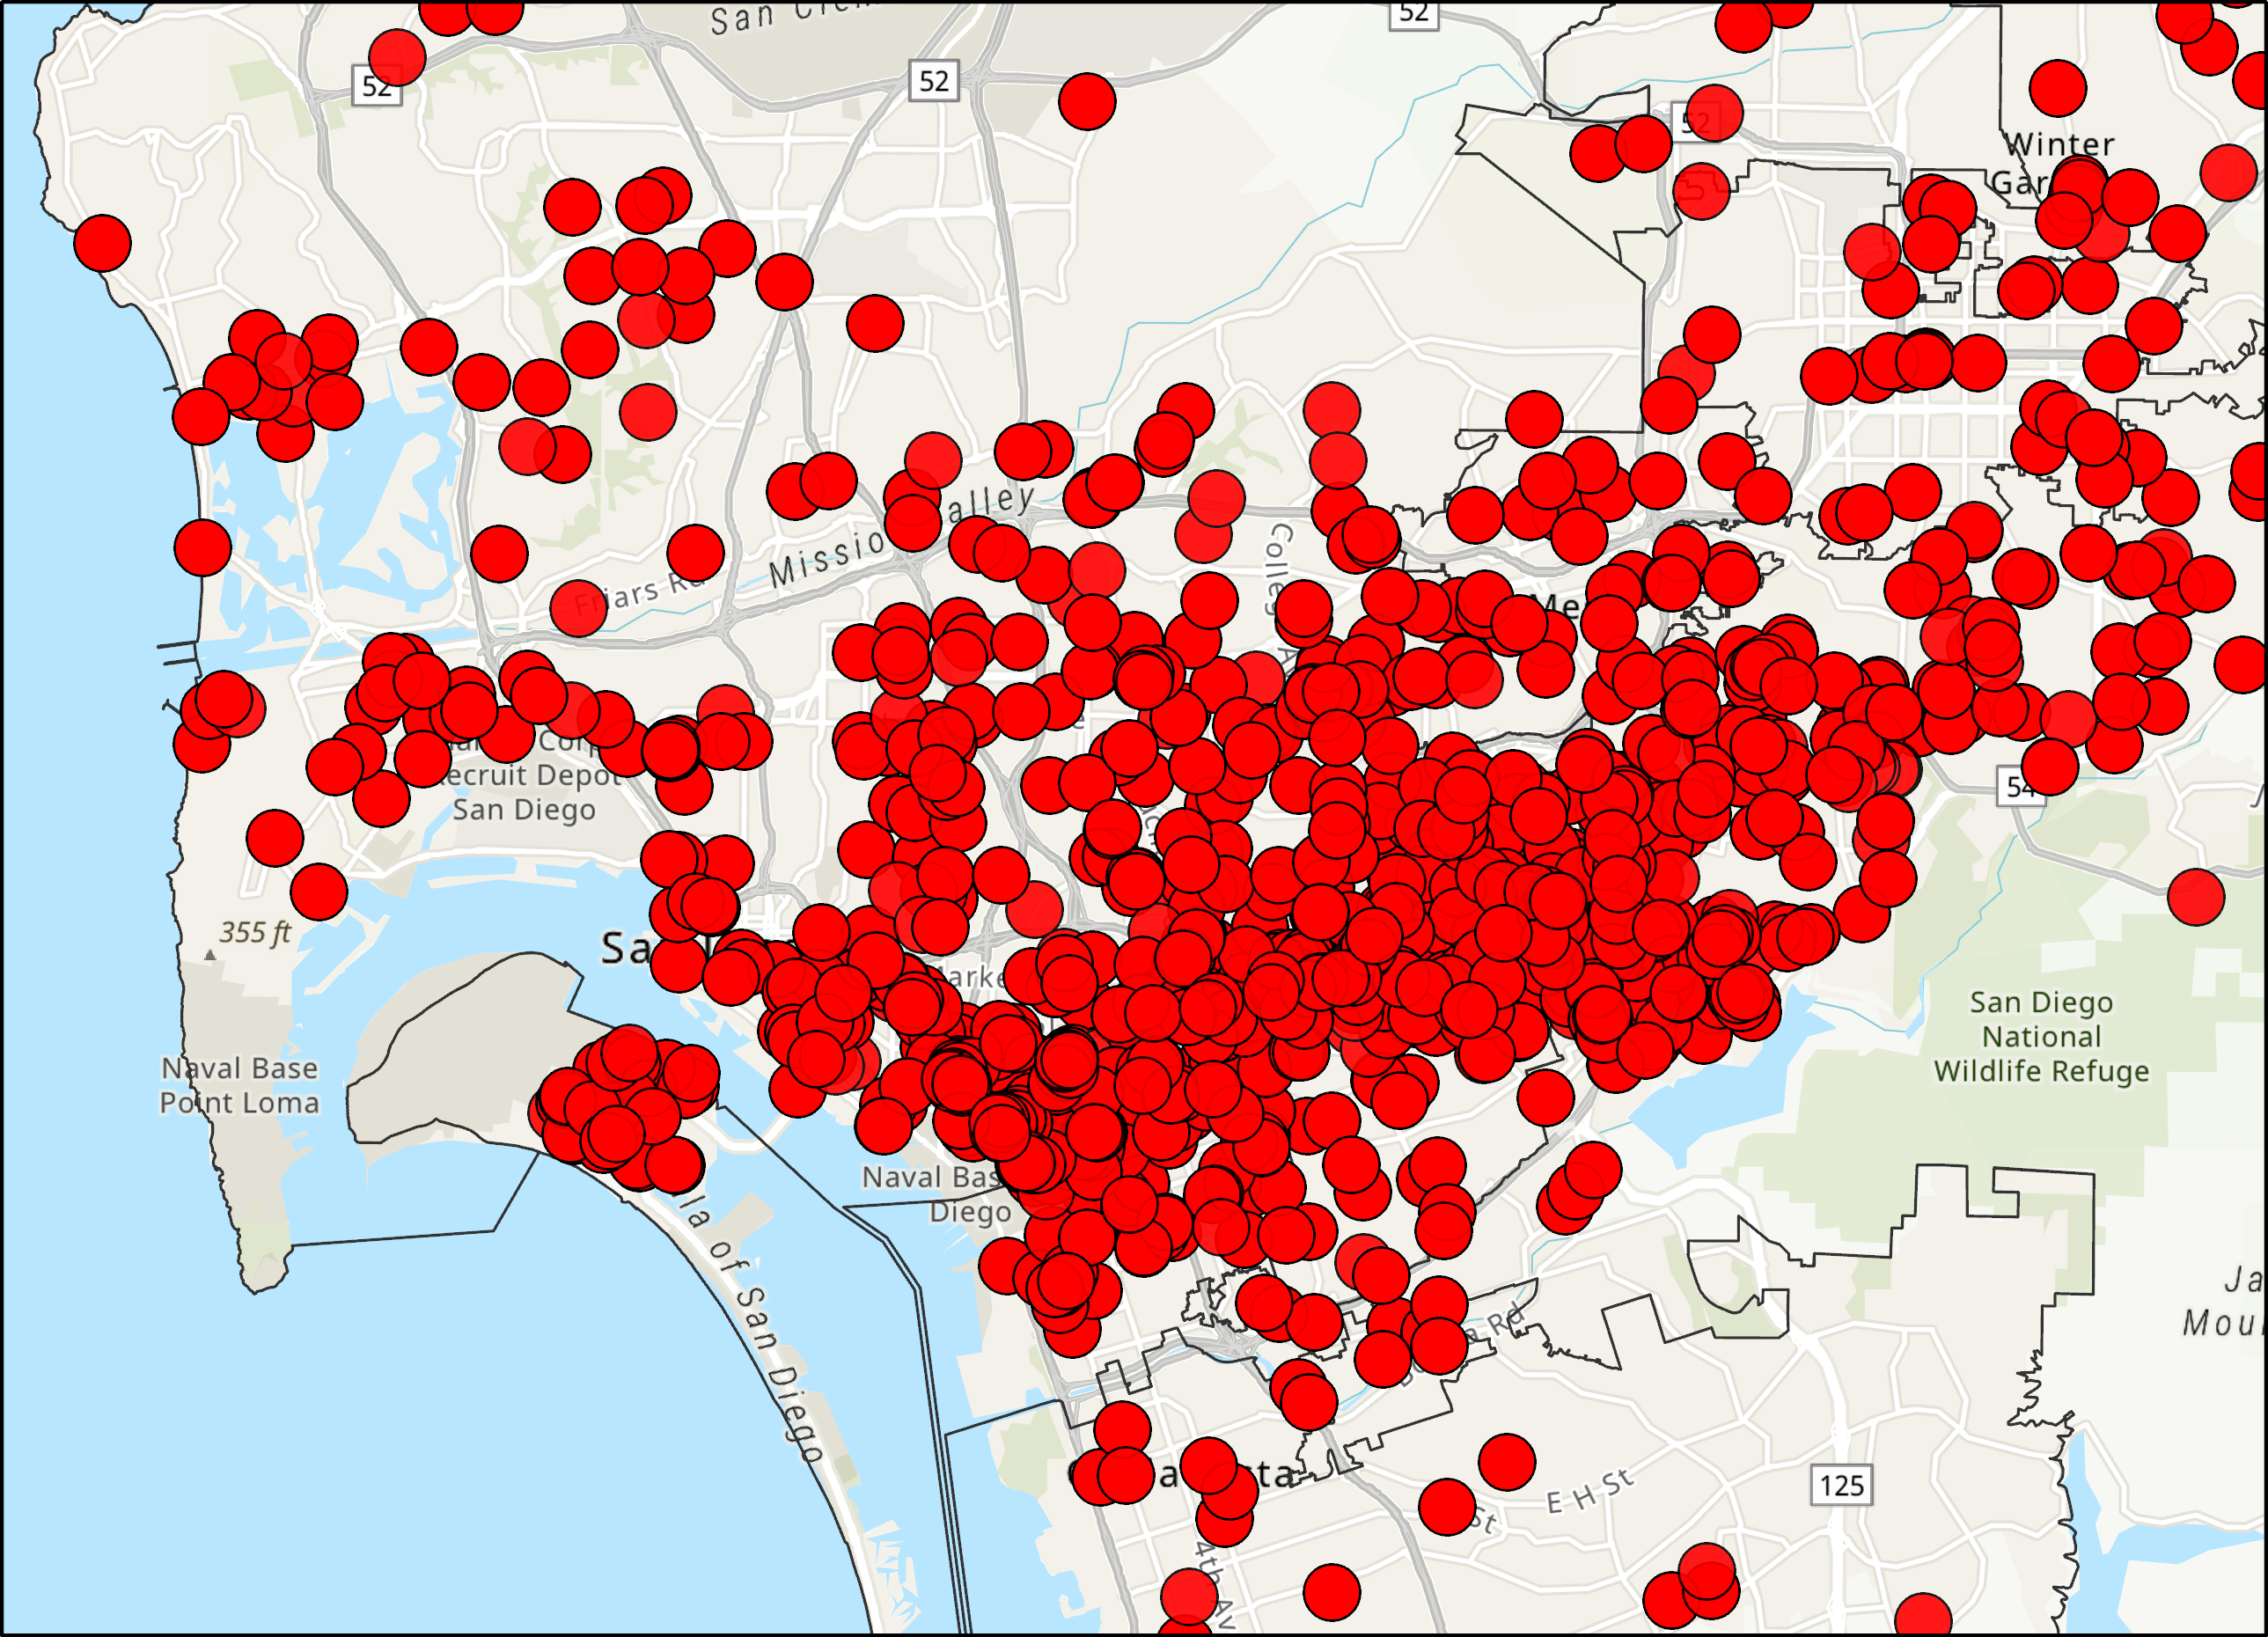 Each dot represents damage self-reported from county residents. The data is being collected for the purpose of providing information about storm impacts to the California Governor’s Office of Emergency Services and to maximize the region’s eligibility for state and federal assistance. At this time, there have been more than 1,600 responses from across the county.